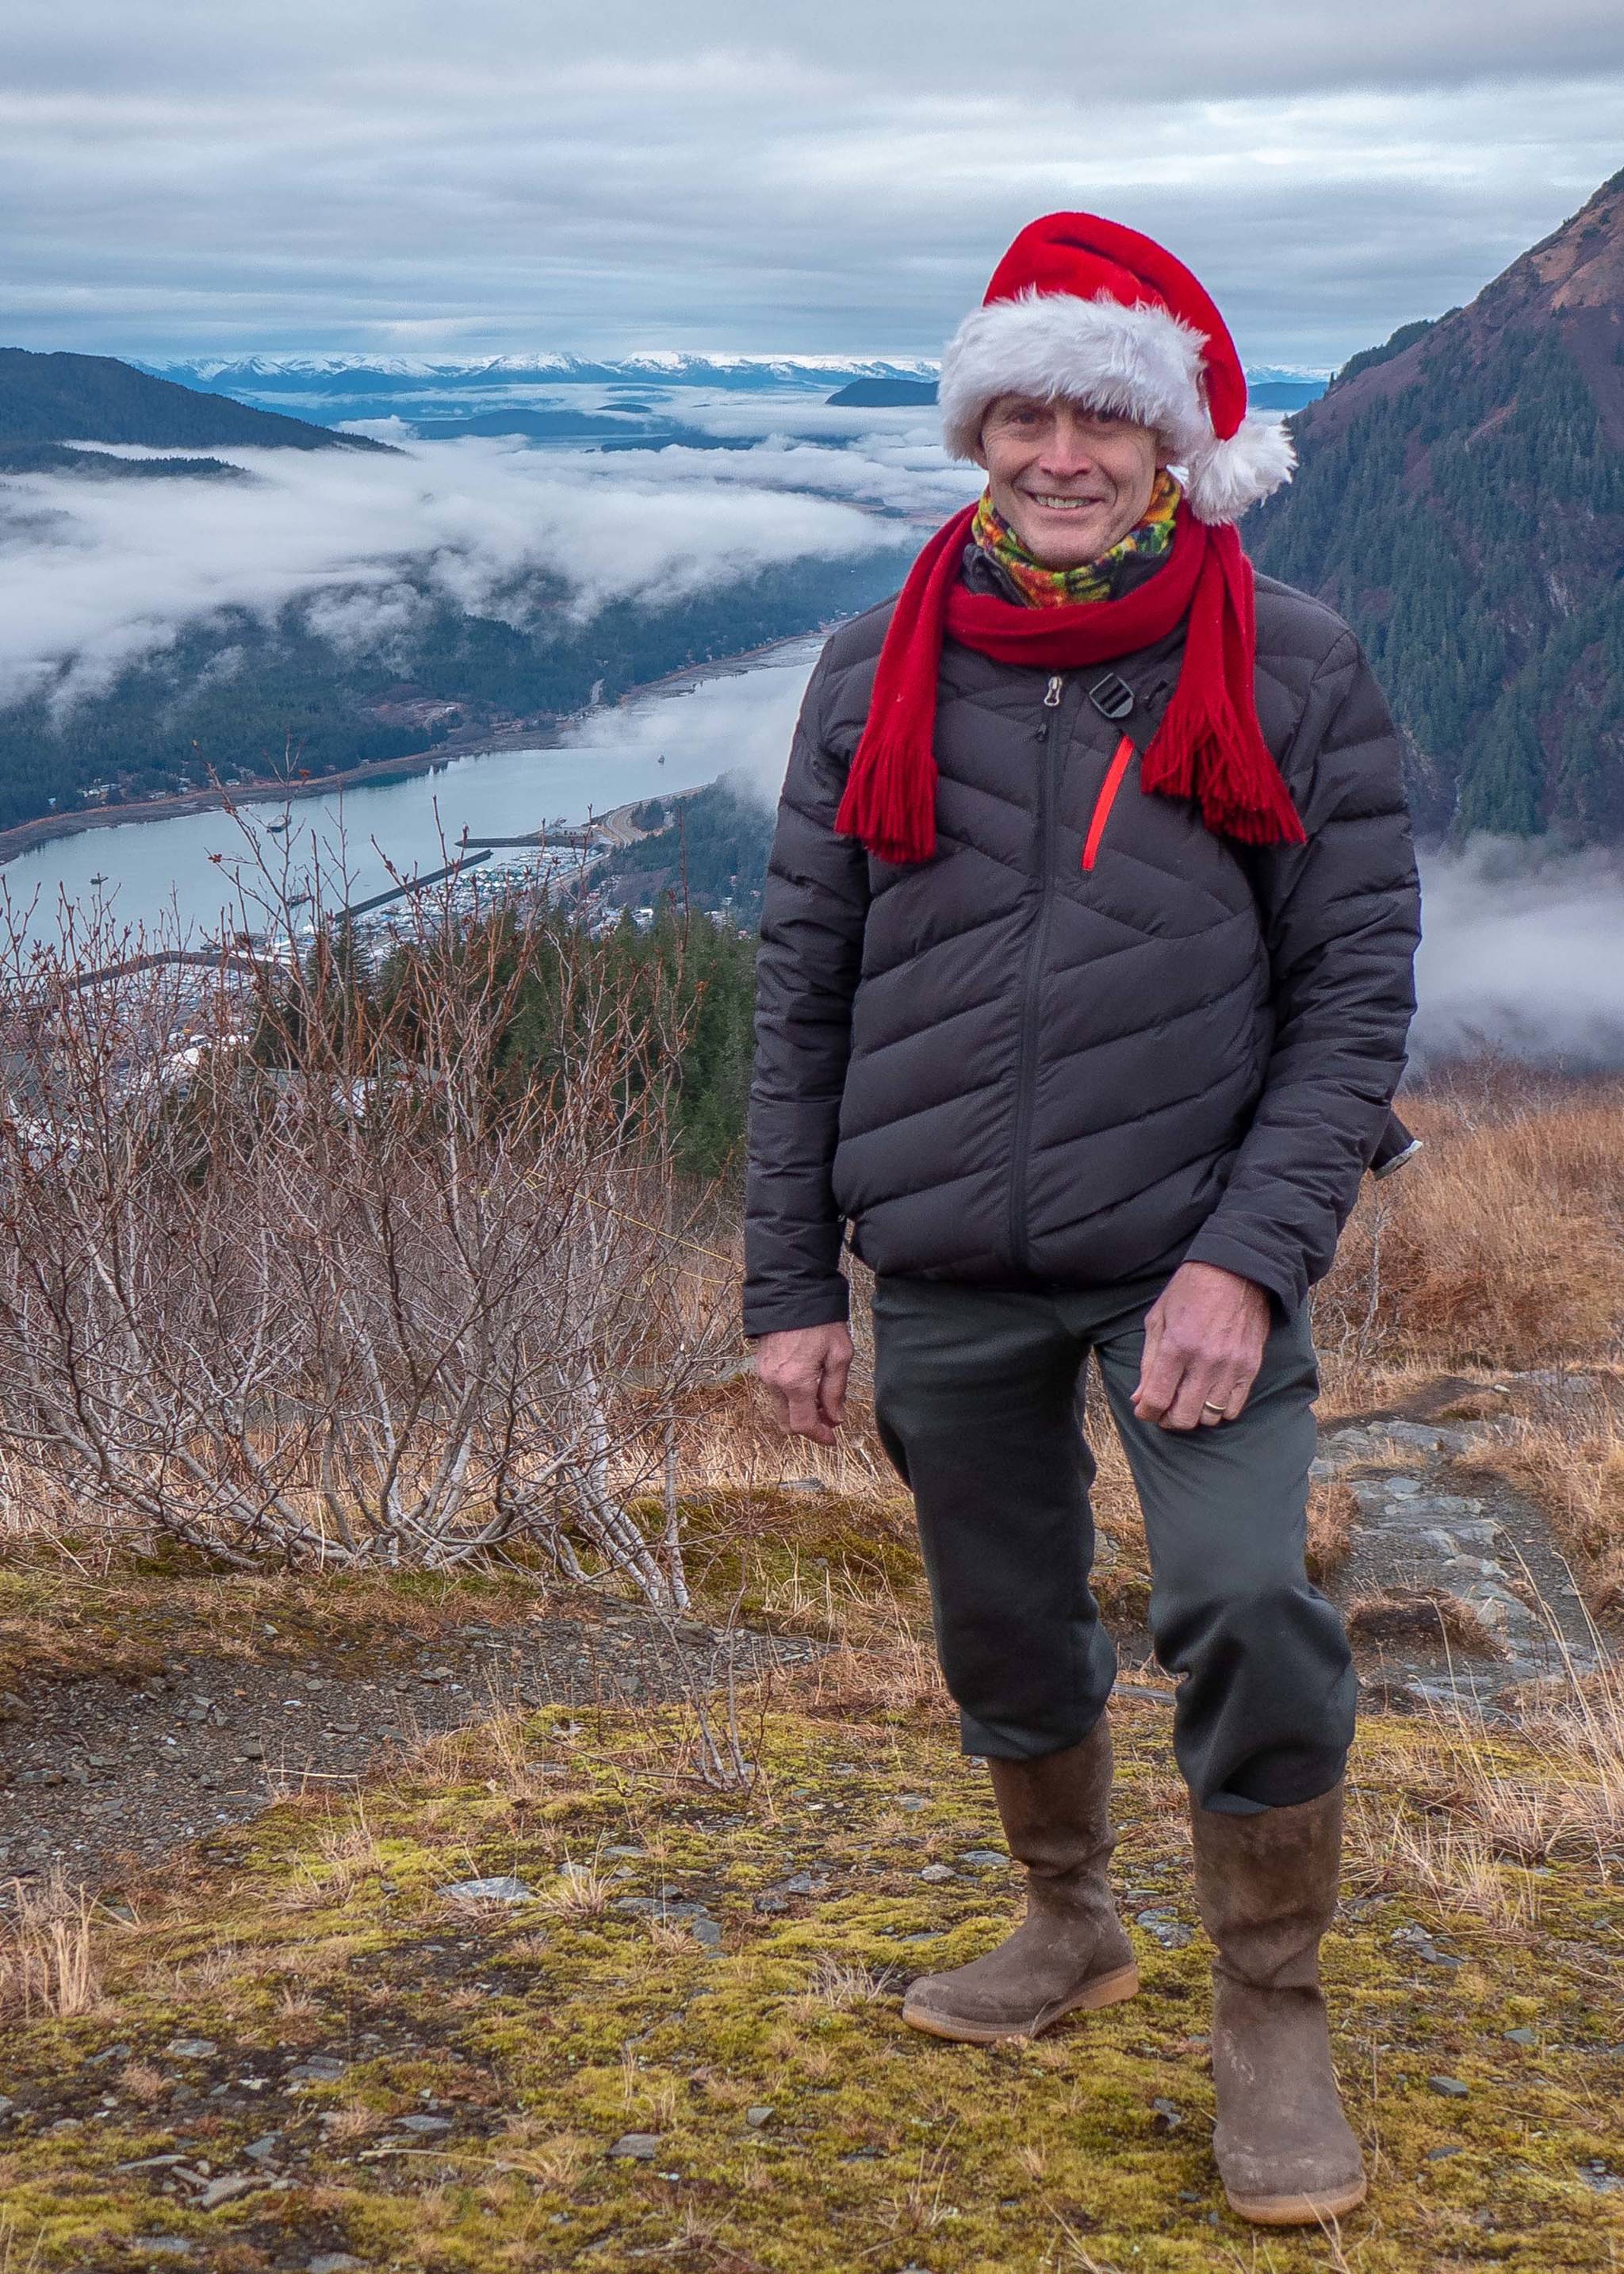 Dec. 9, 2018: On this gray December day, it sure didn’t look much like winter. But that didn’t stop Mark Miller from getting into the holiday spirit on a hike with friends above the tram. Mandatory wardrobe for the mountain was his insulated jacket from Spyder, pants from Slates, and hiking boots from Le Chameau. His fleece neck gaiter, crimson chenille scarf and Santa’s hat brought color to the day and made everyone smile.